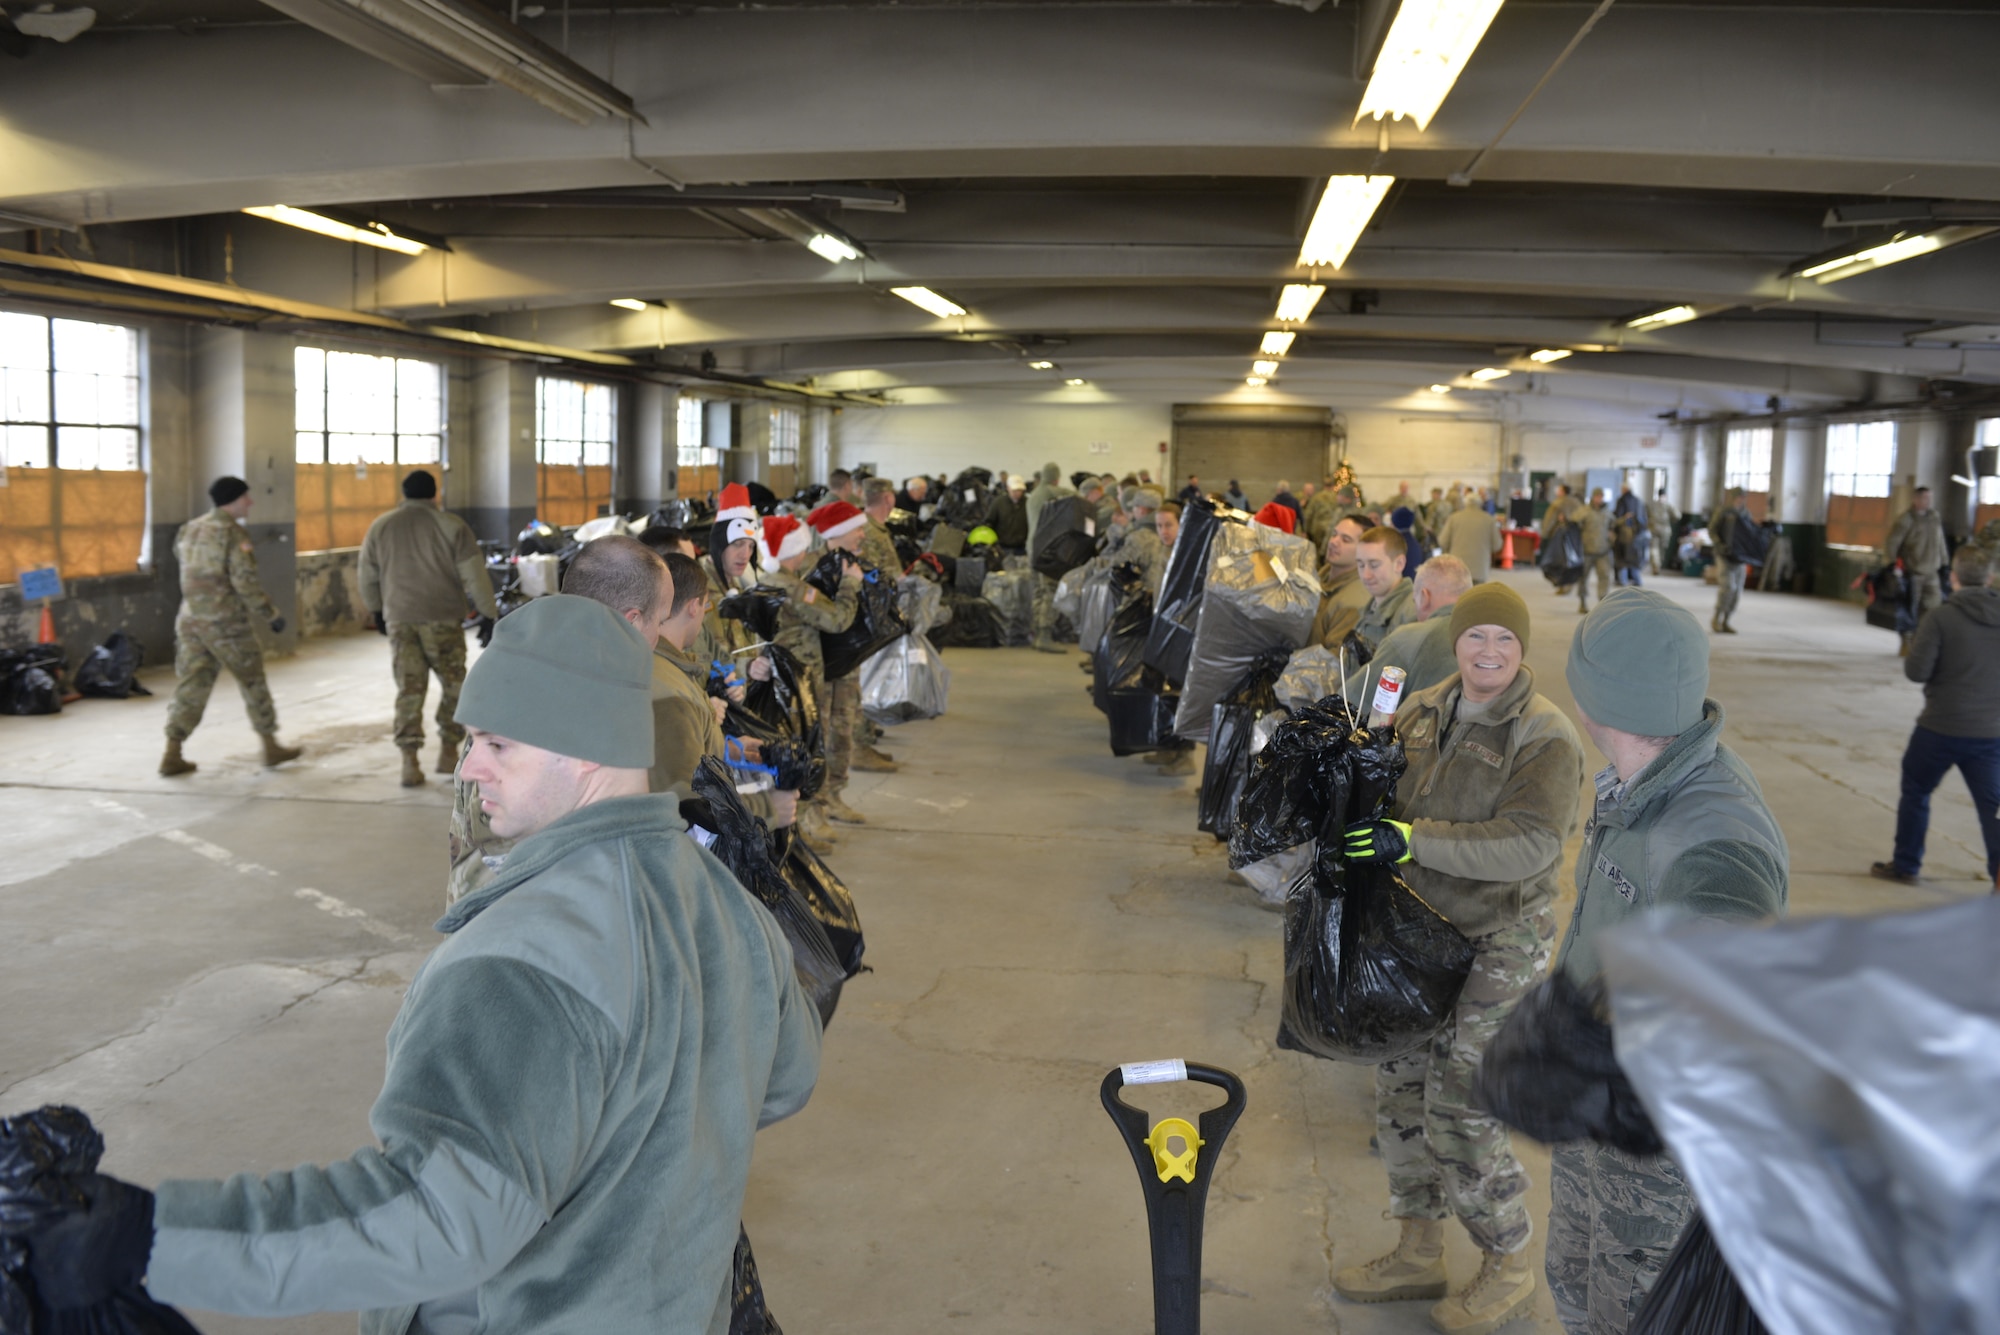 N.H. National Guardsmen help load donated Christmas gifts as part of Operation Santa Claus on Dec. 16 in Concord. Volunteers from the State Employees' Association, SEIU Local 1984, partner with N.H. guardsmen annually to transport presents to distribution points throughout the state. The program has been led by the SEA since 1960, and ensures gifts are provided to thousands of NH children in need. (U.S. Air National Guard photo by Tech. Sgt. Aaron Vezeau)